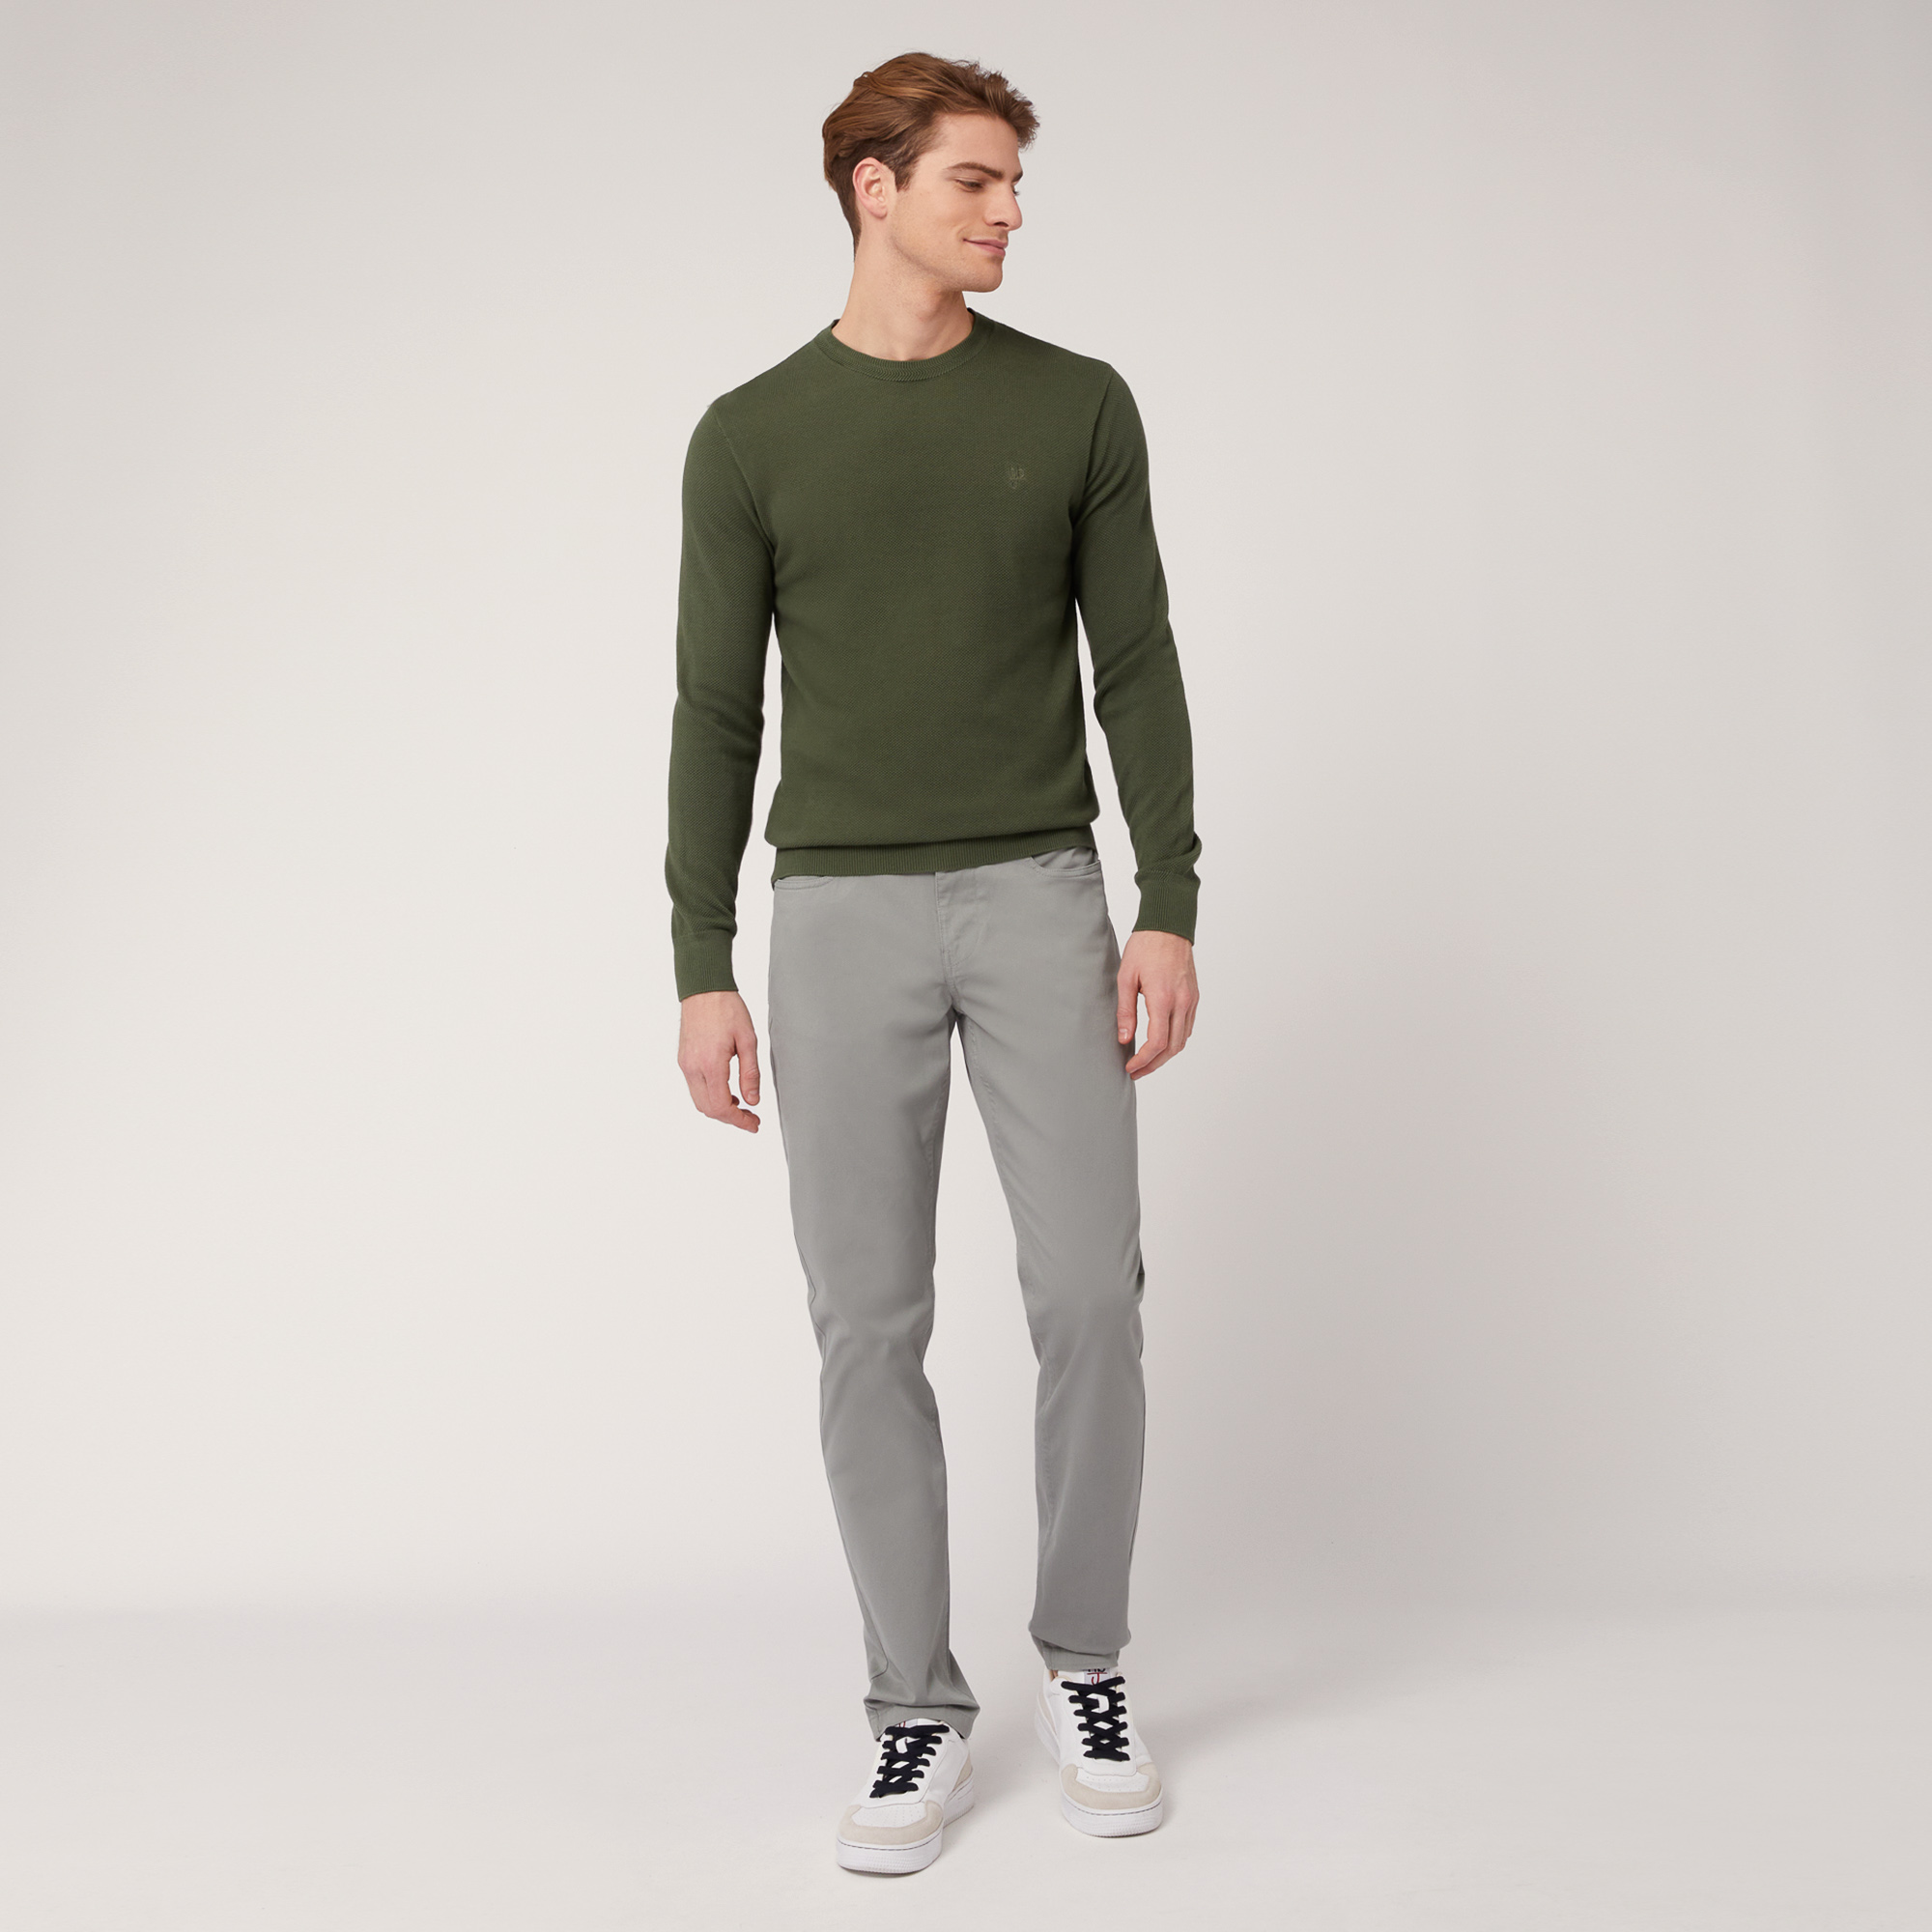 Pullover Girocollo Texture 3D, Verde, large image number 3